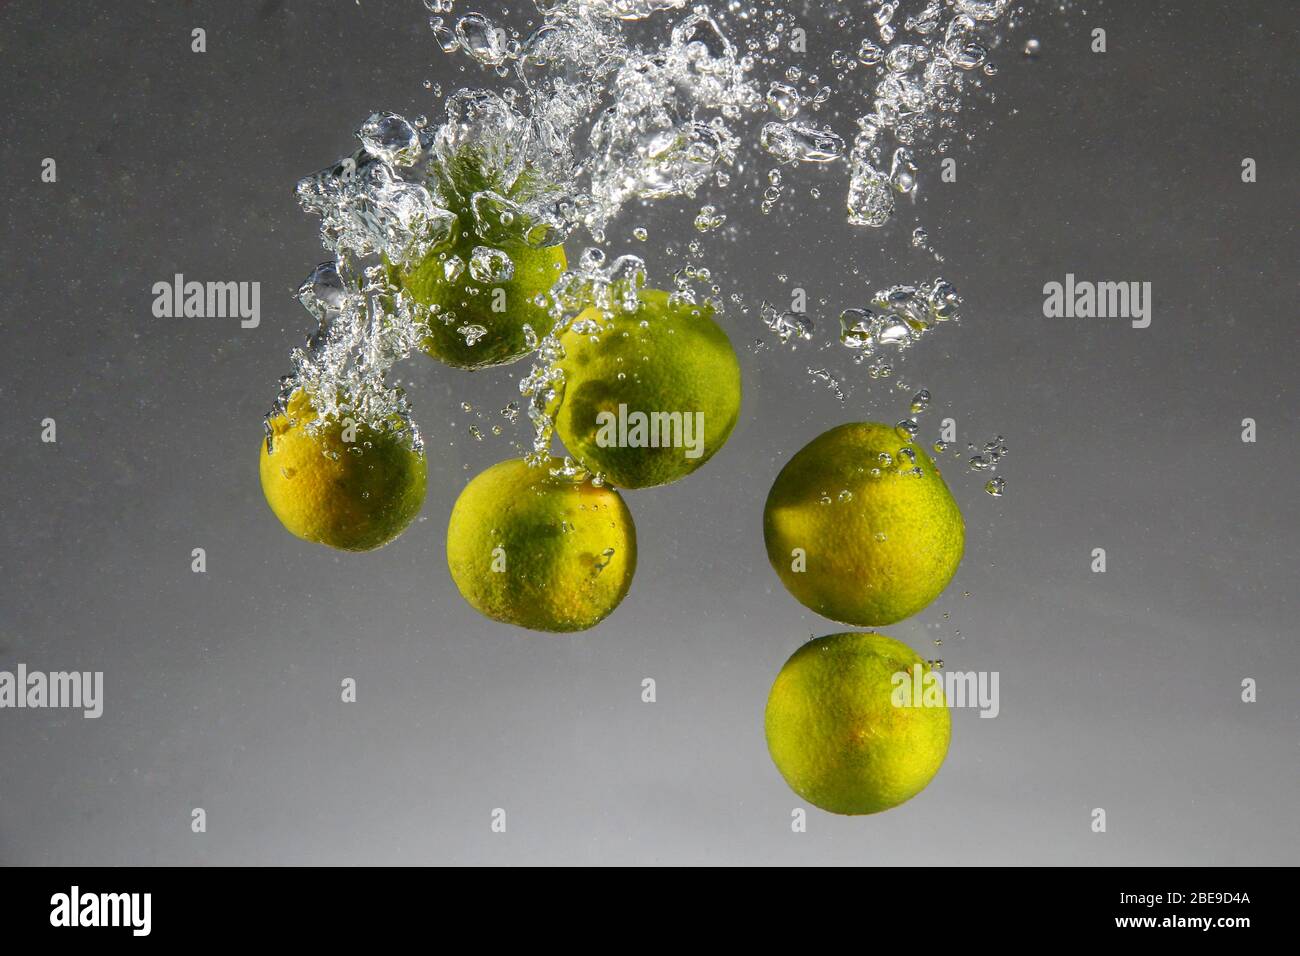 Photo of Calamondin or Philippine lime or calamansi dropped in water Stock Photo